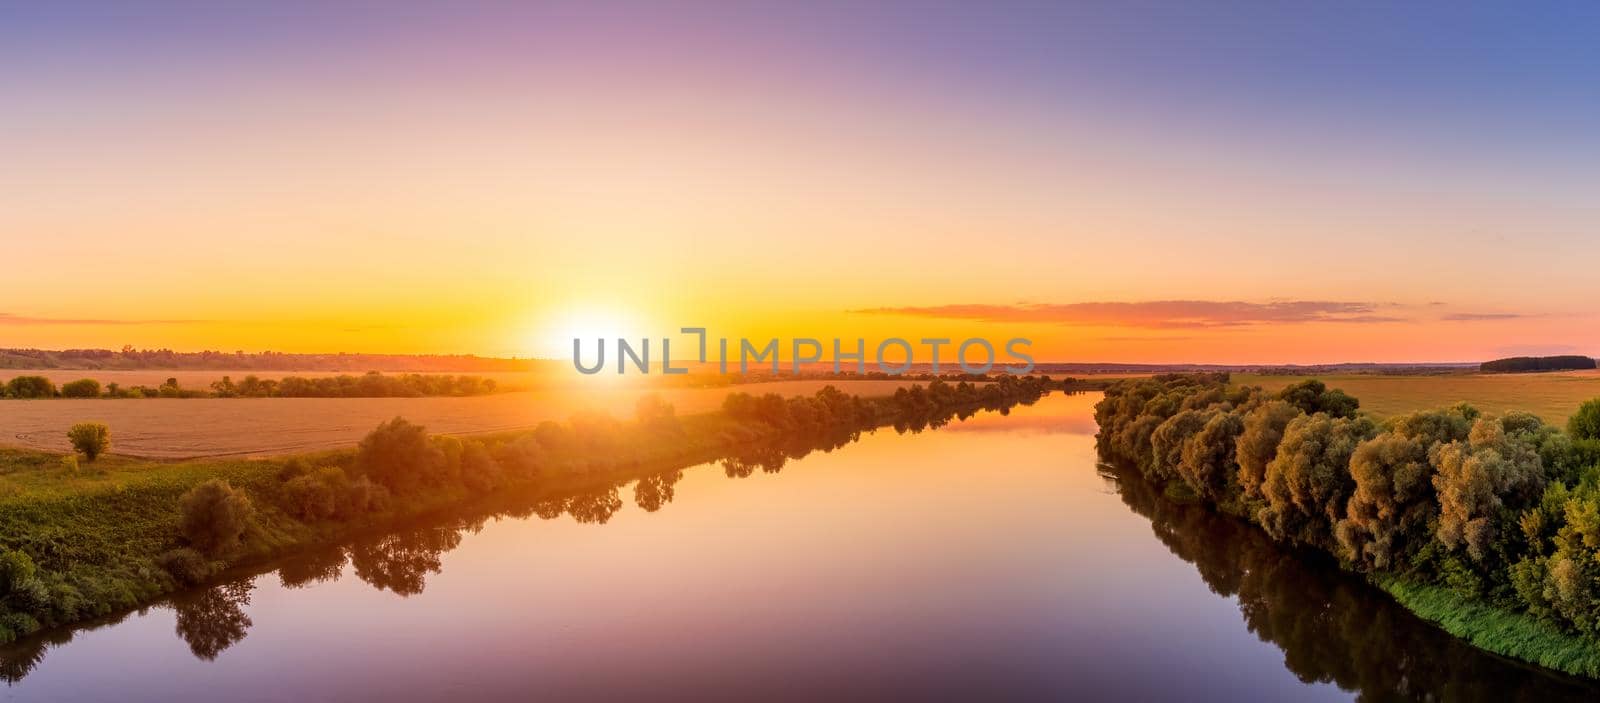 A sunset or sunrise scene over a lake or river with skies reflecting in the water on a summer evening or morning. Landscape.